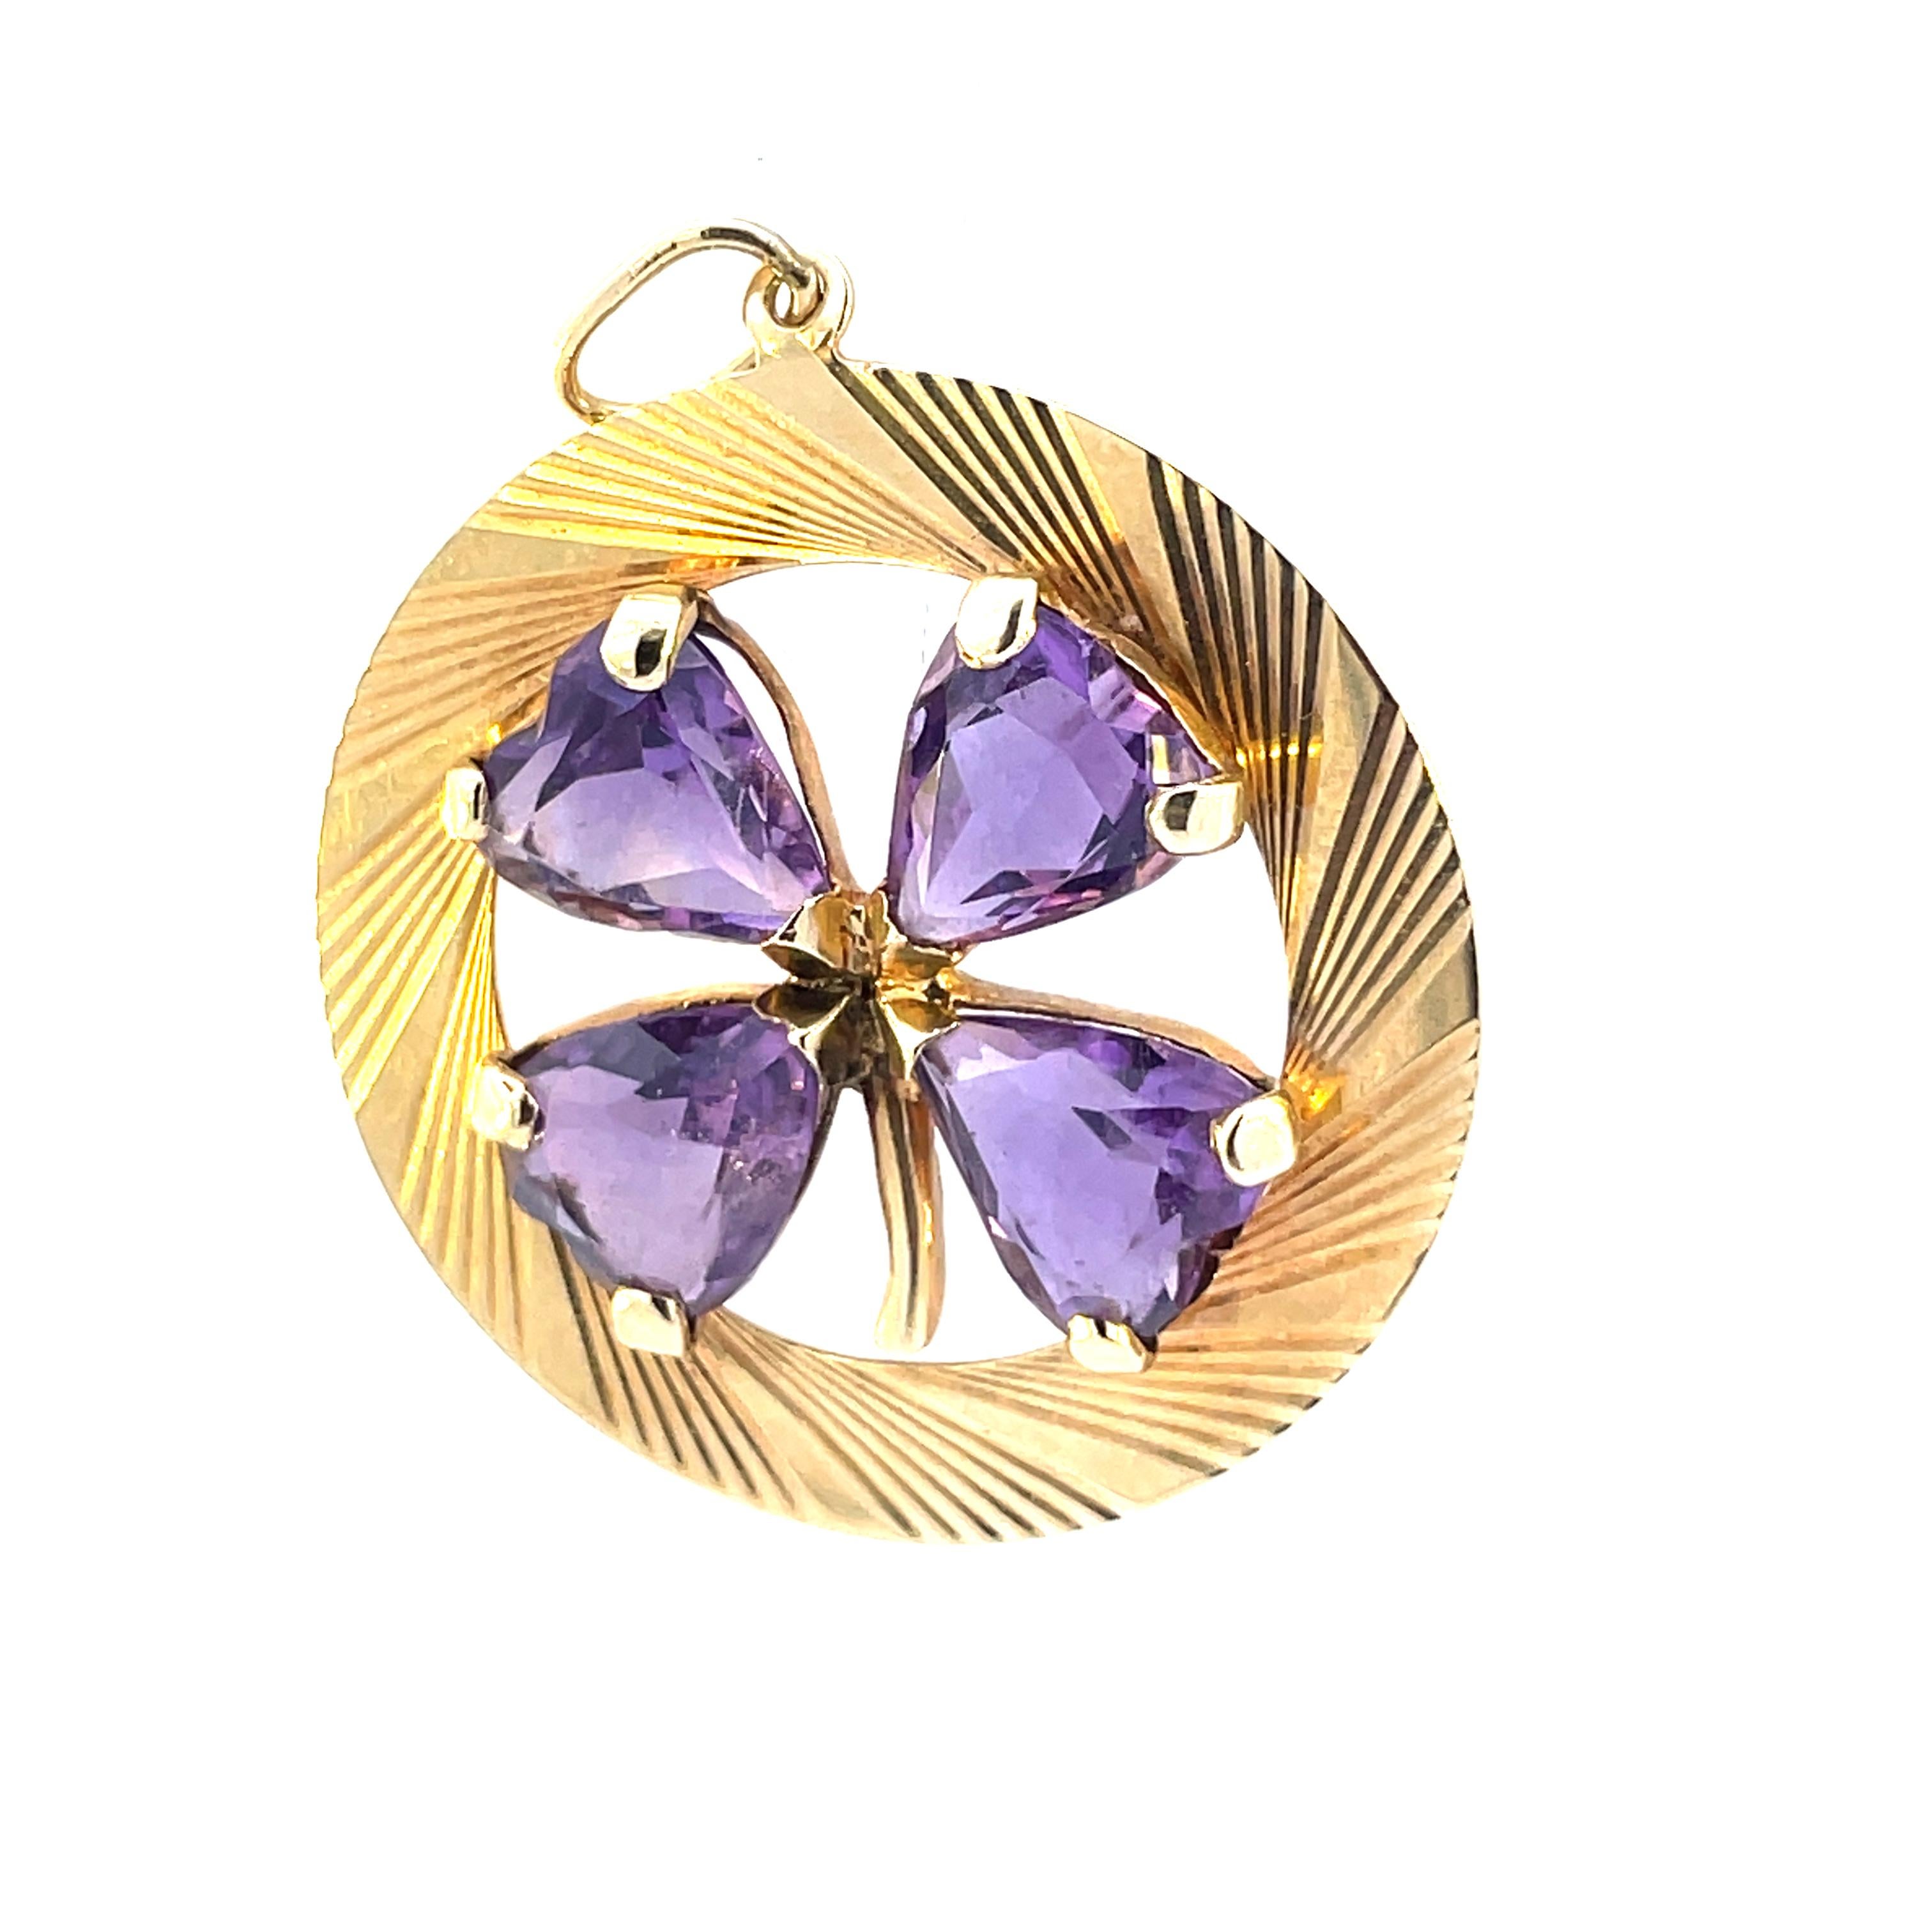 1950s Retro 14k Yellow Gold and Amethyst Clover Pendant 
- 14K Yellow Gold 
- 4 = 9.00x5.75mm heart amethyst 
- 8.26 grams 
- 1950s 

This is a stunning retro clover pendant from the 1950s made in 14k yellow gold with heart amethyst. The centerpiece